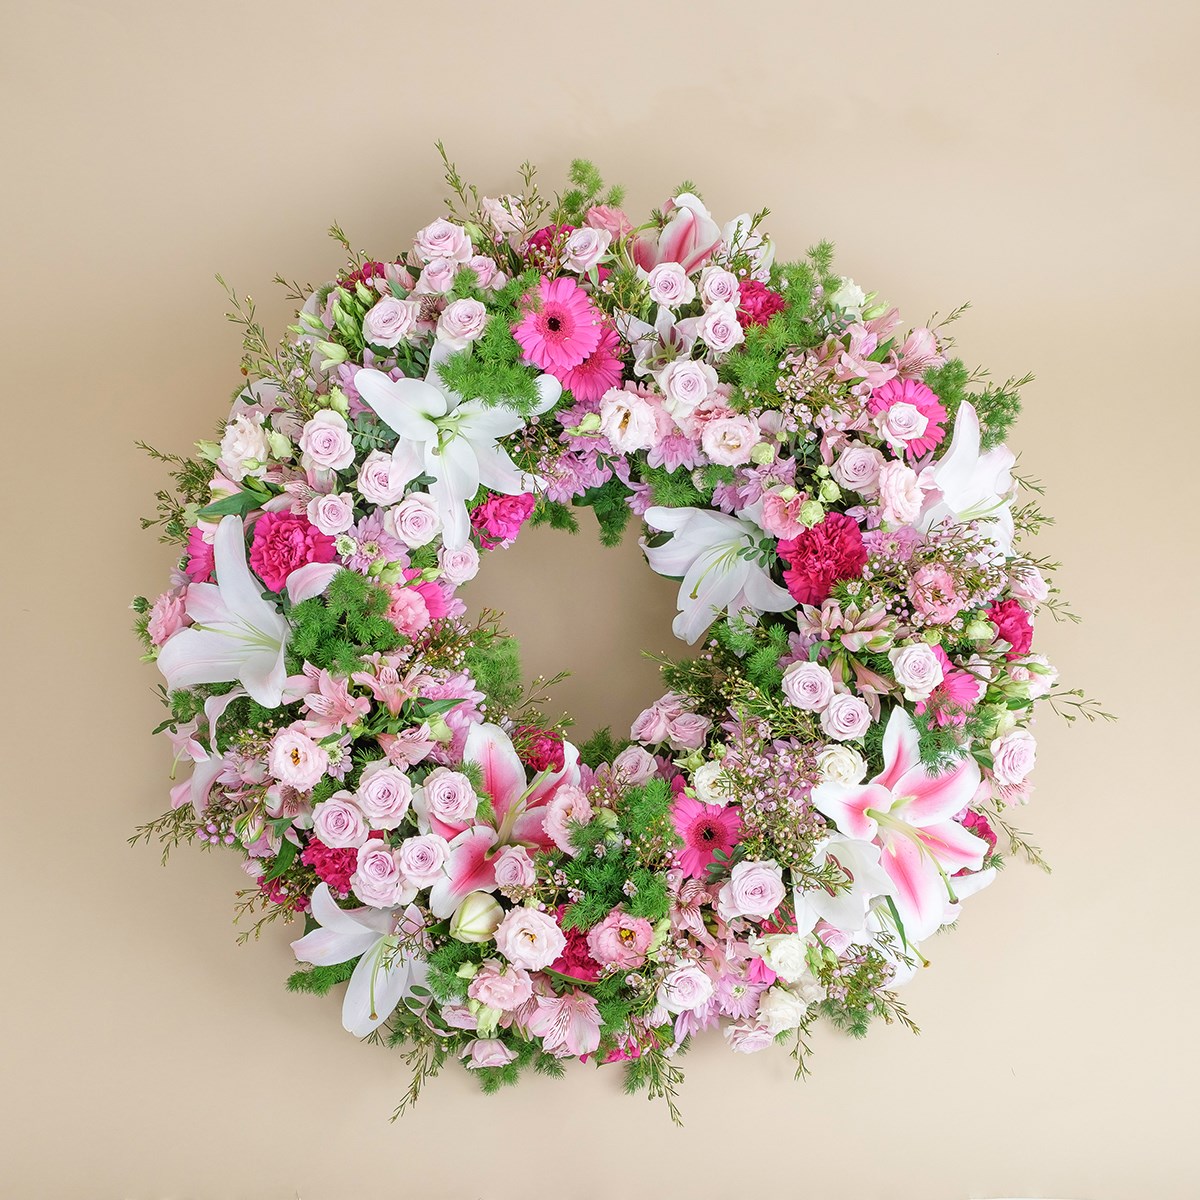 product image for Small premium funeral wreath in shades of pink